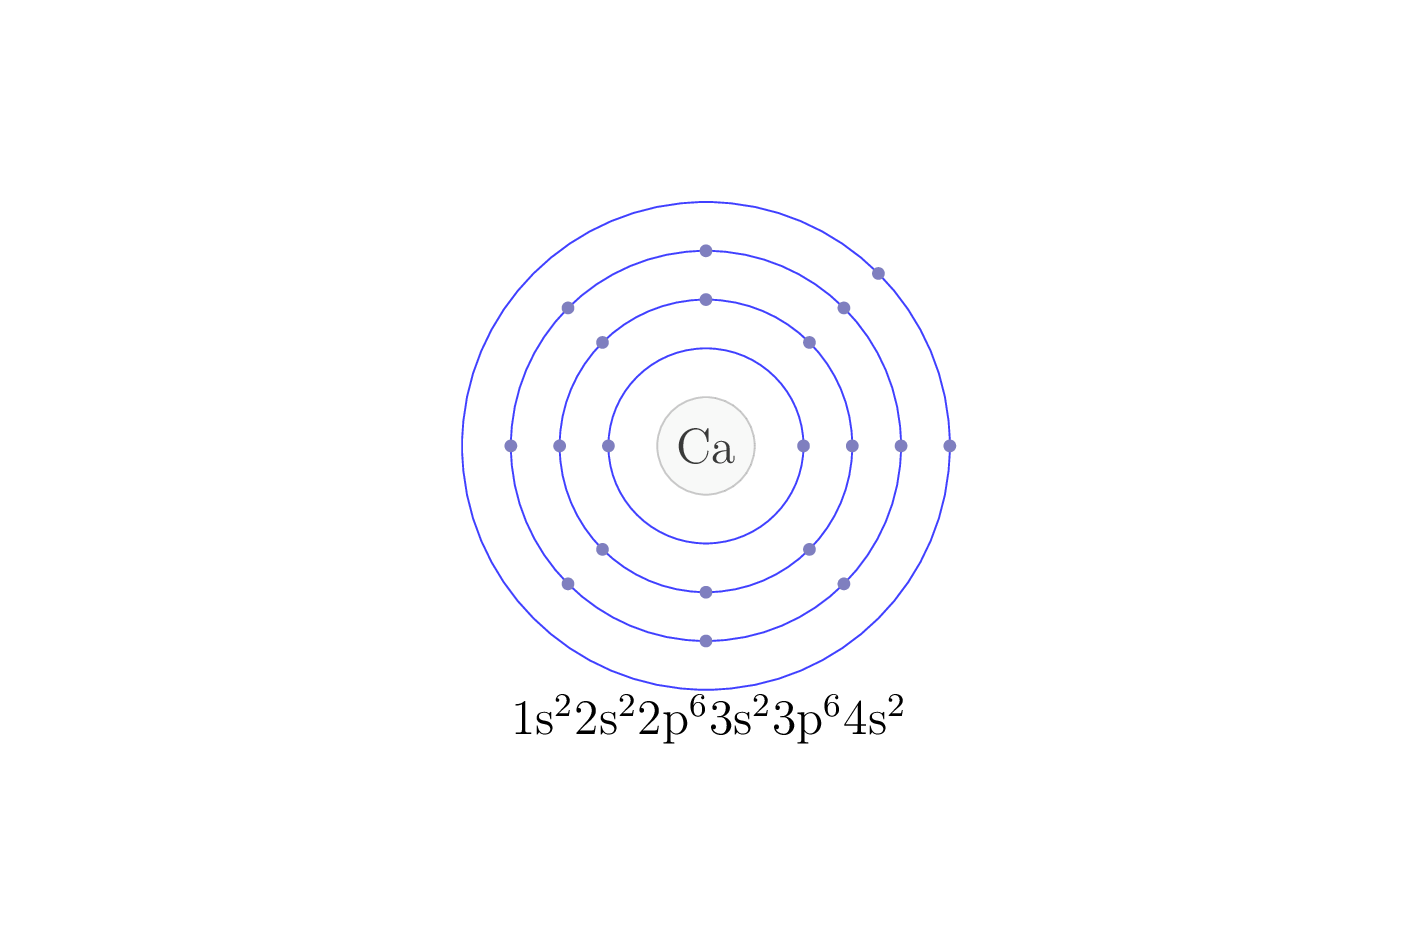 electron configuration of element Ca